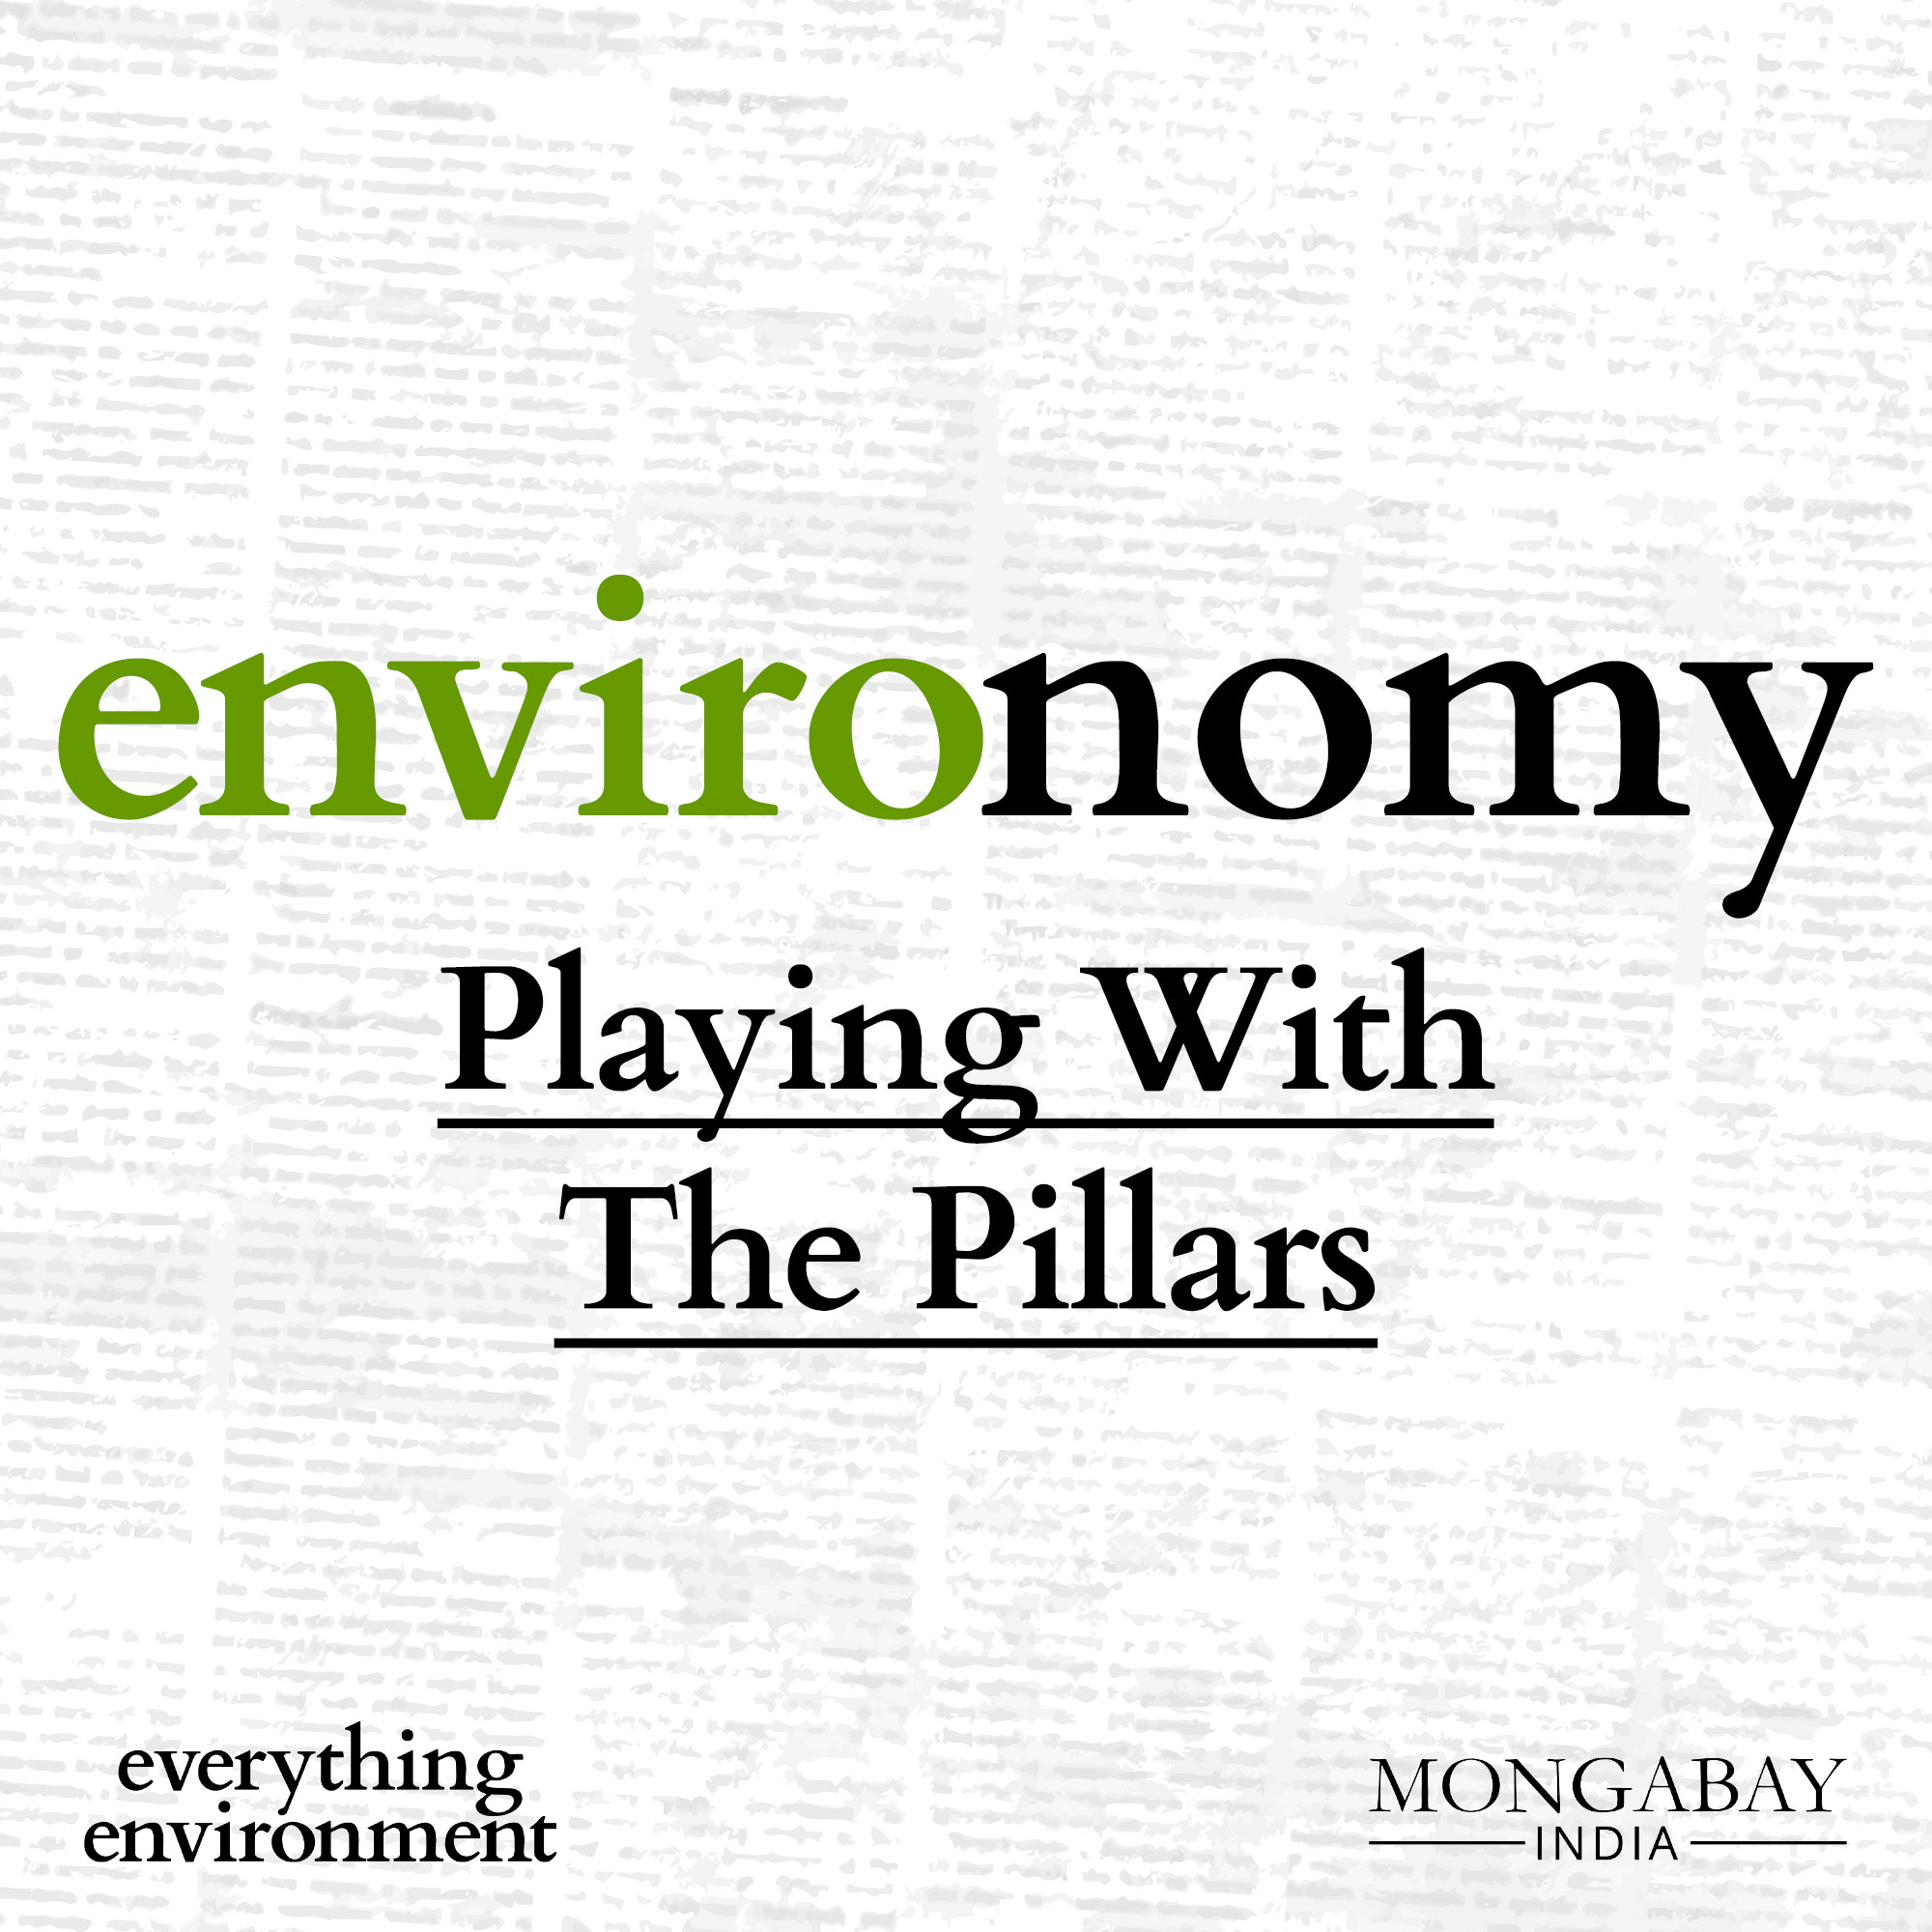 Environomy: Playing With The Pillars